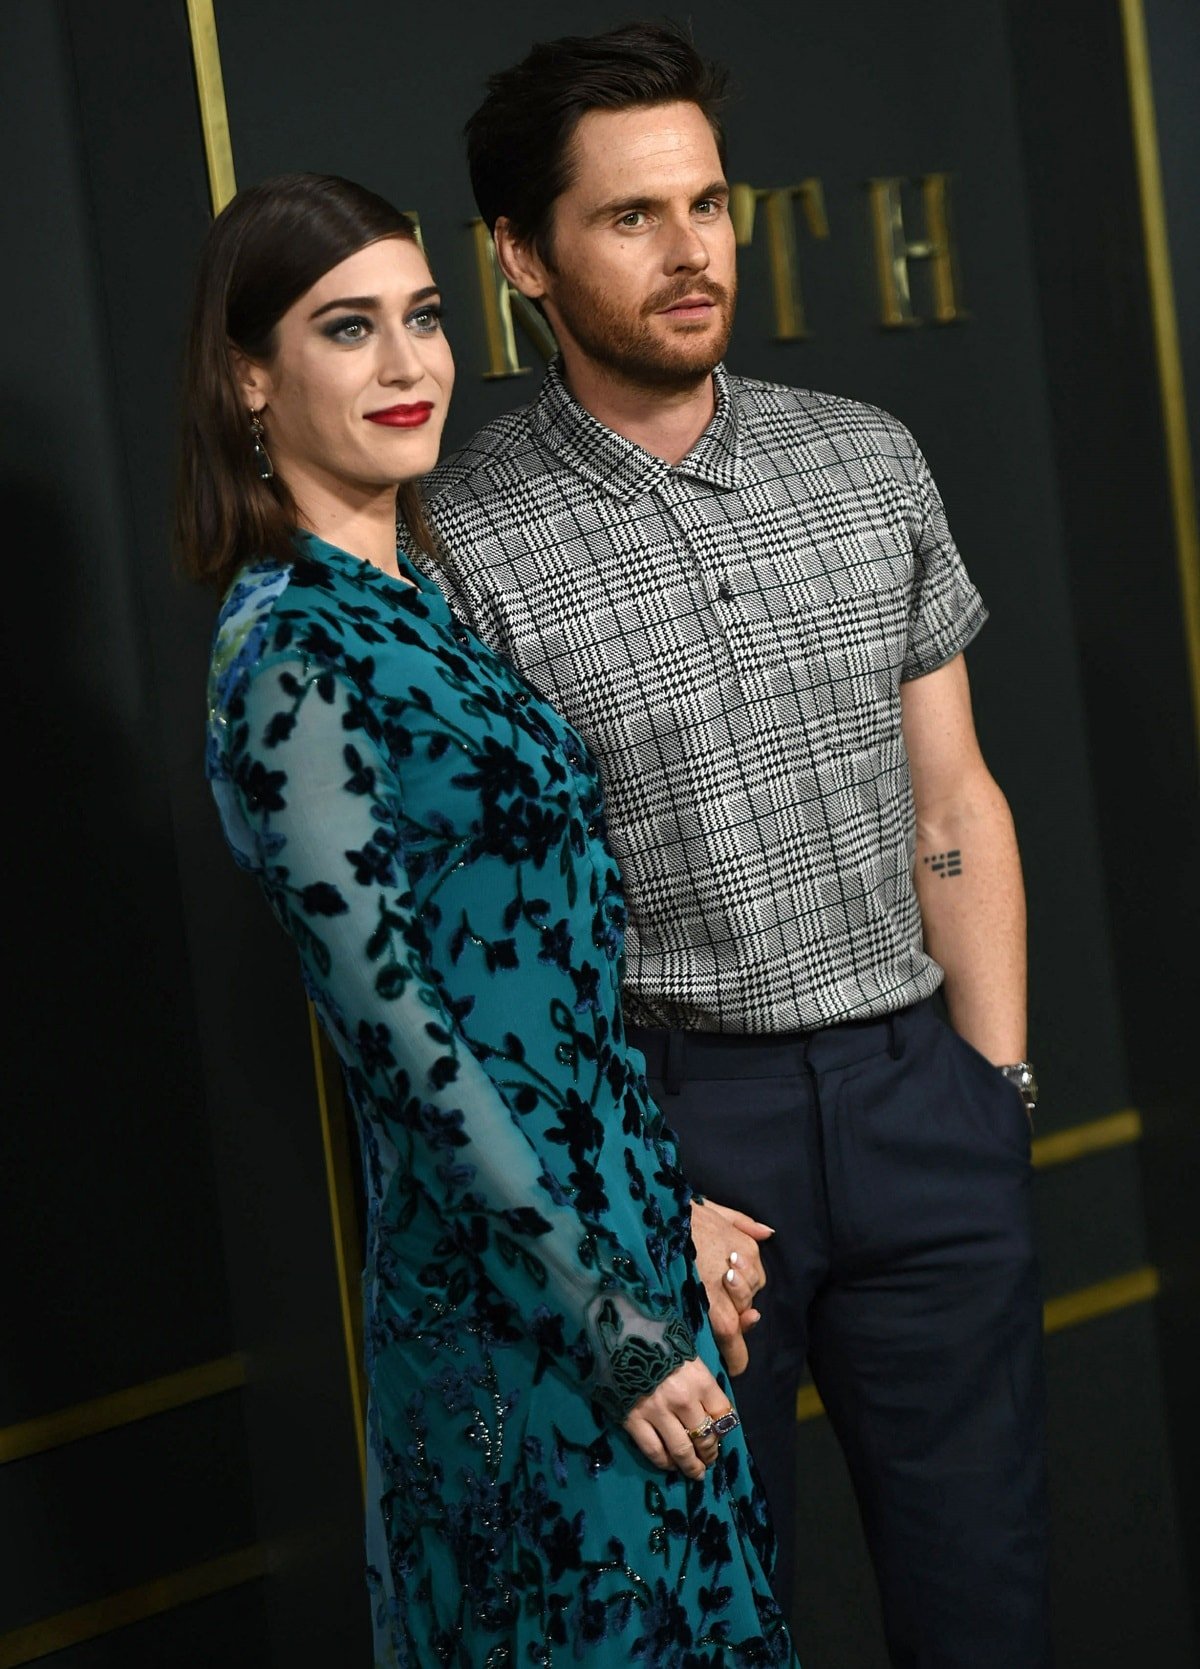 Lizzy Caplan in a Chloe Fall 2019 dress with her husband, Tom Riley, at the premiere of Apple TV+